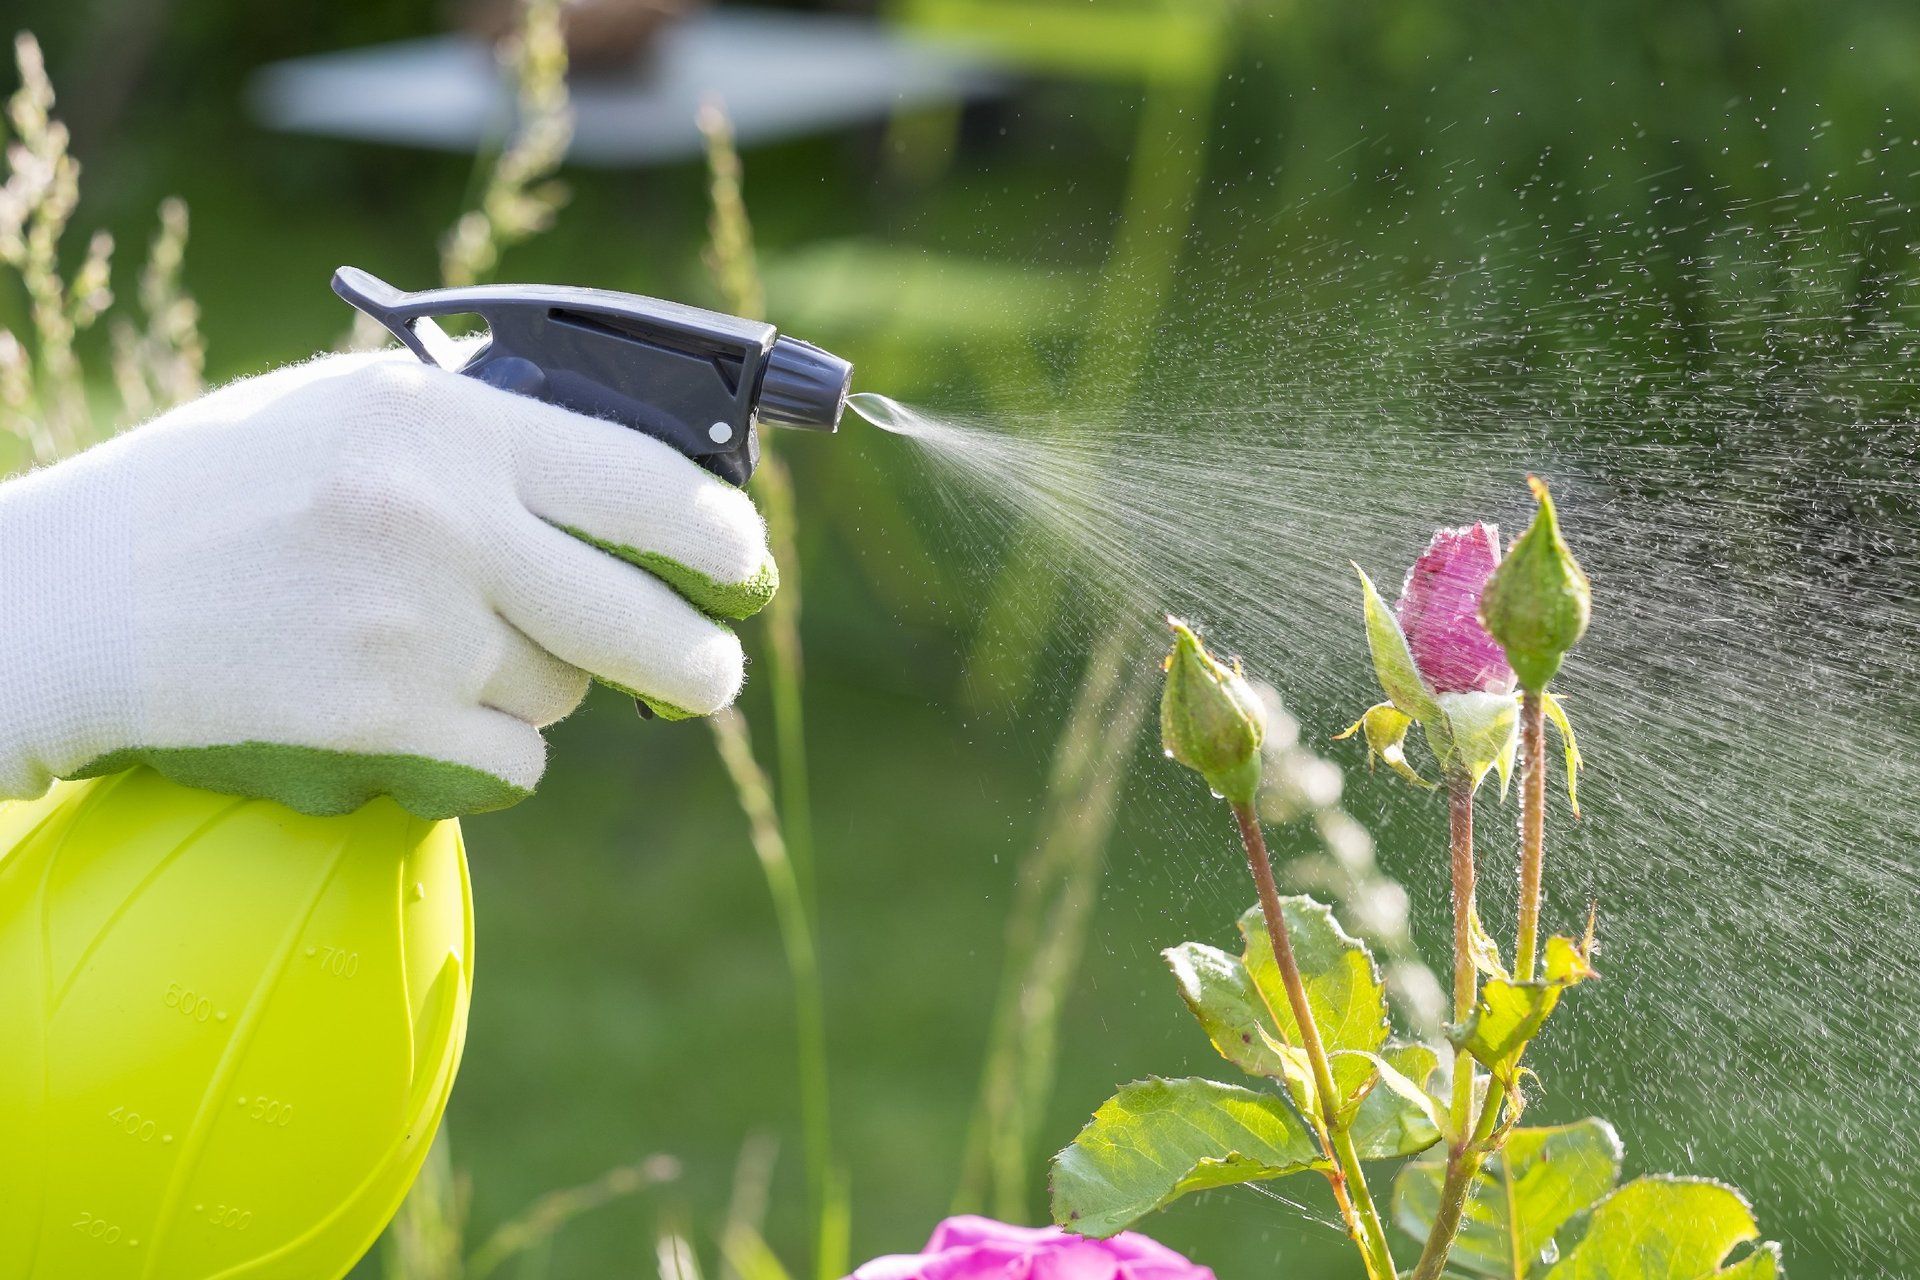 The hands of a gardener, spraying pesticide on some flowers.